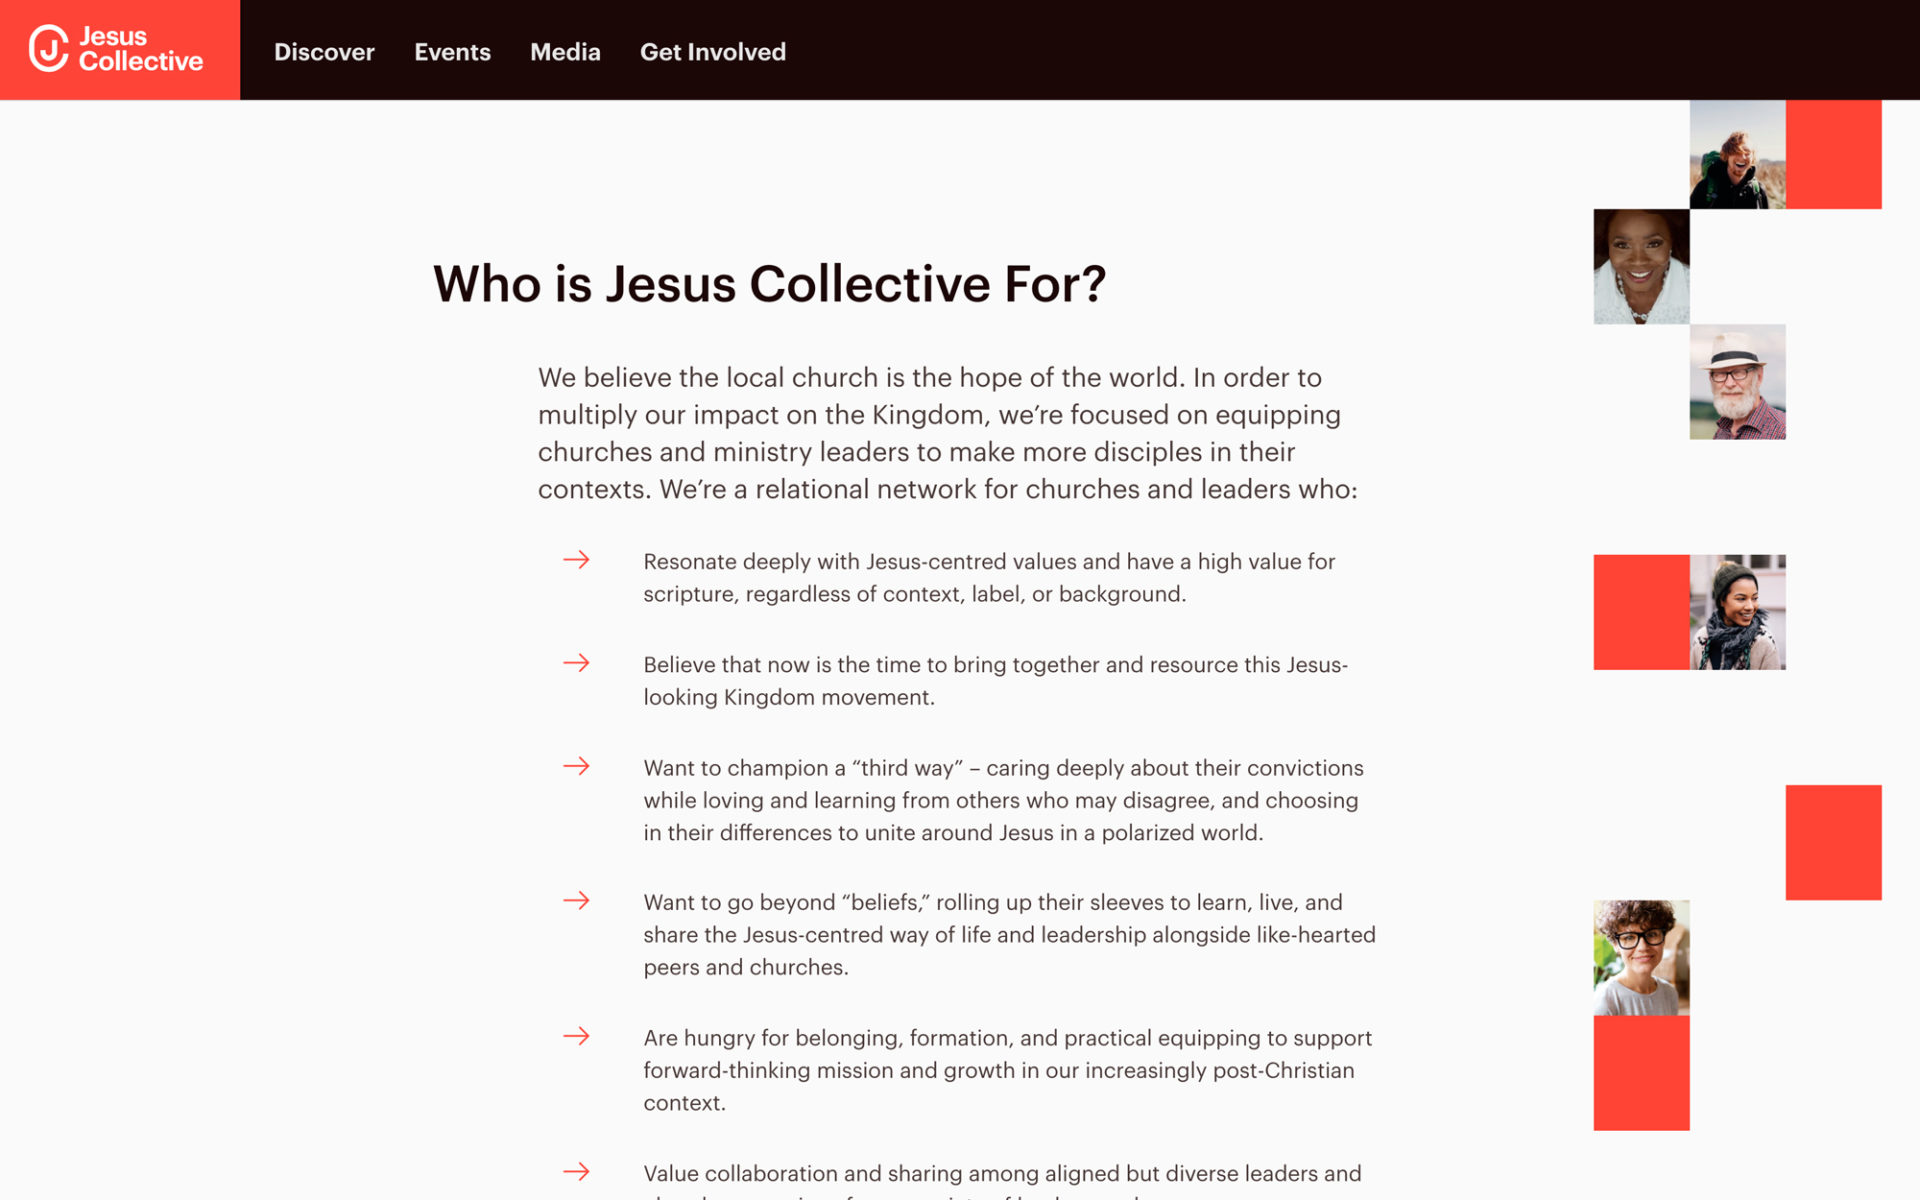 "Who is Jesus Collective for?" section